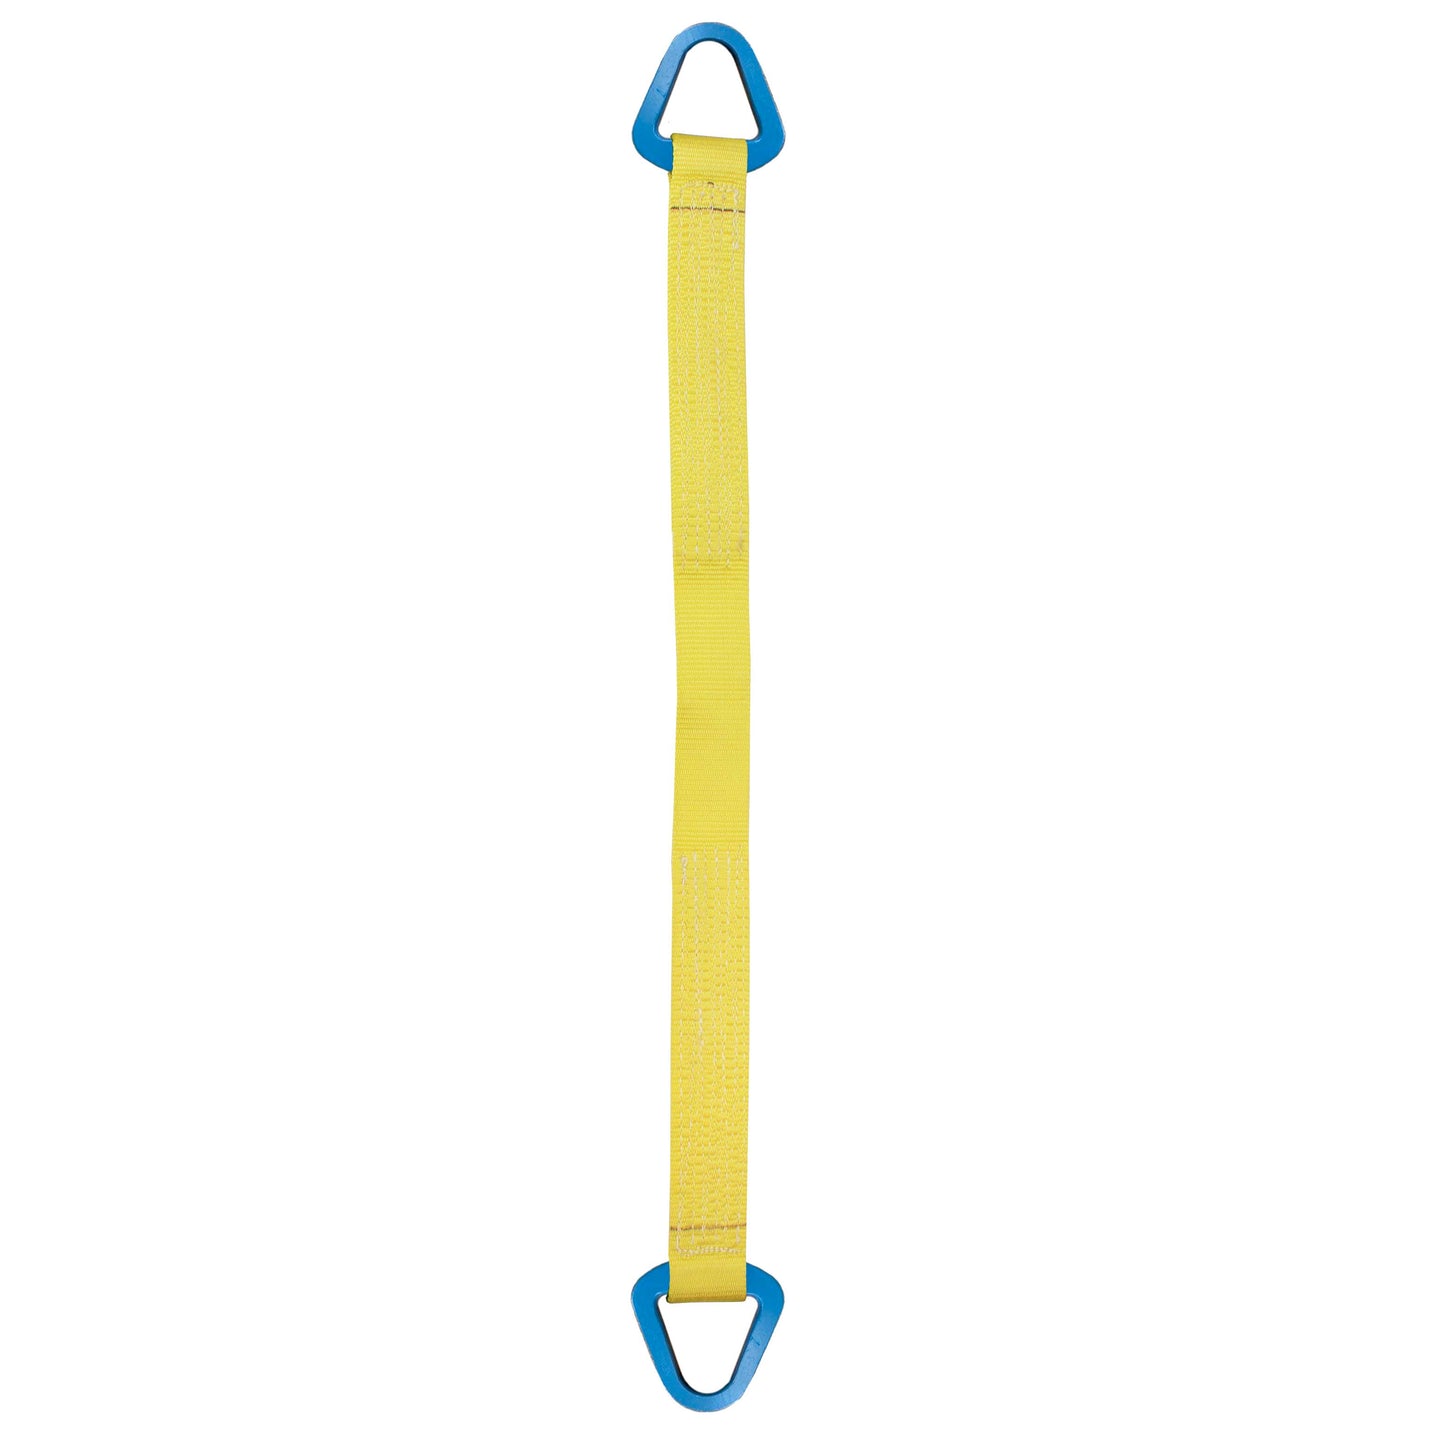 Nylon Lifting Sling Triangle 8 inch x 12 foot 2ply image 1 of 2